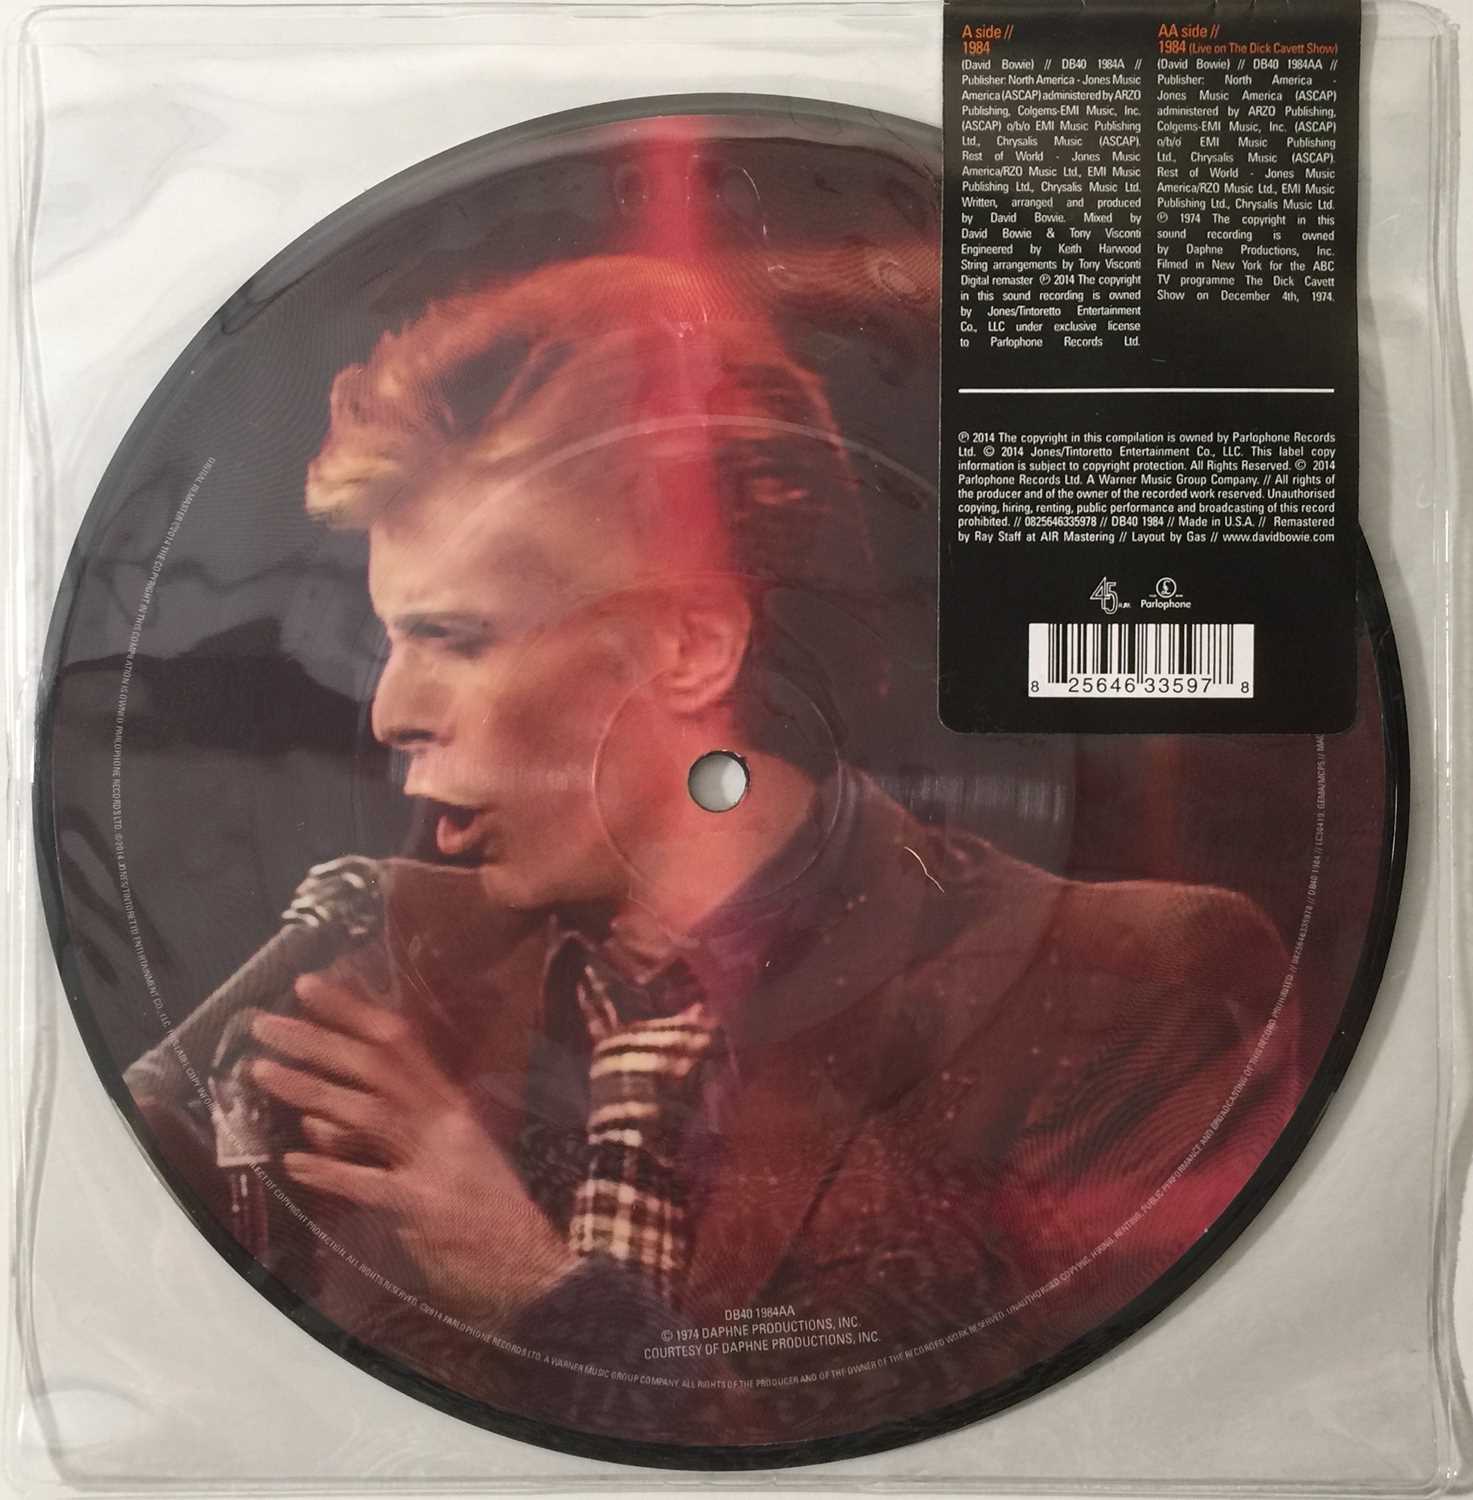 DAVID BOWIE - 1984 7" (40TH ANNIVERSARY 2014 PICTURE DISC RELEASE - DB40 1984) - Image 2 of 2